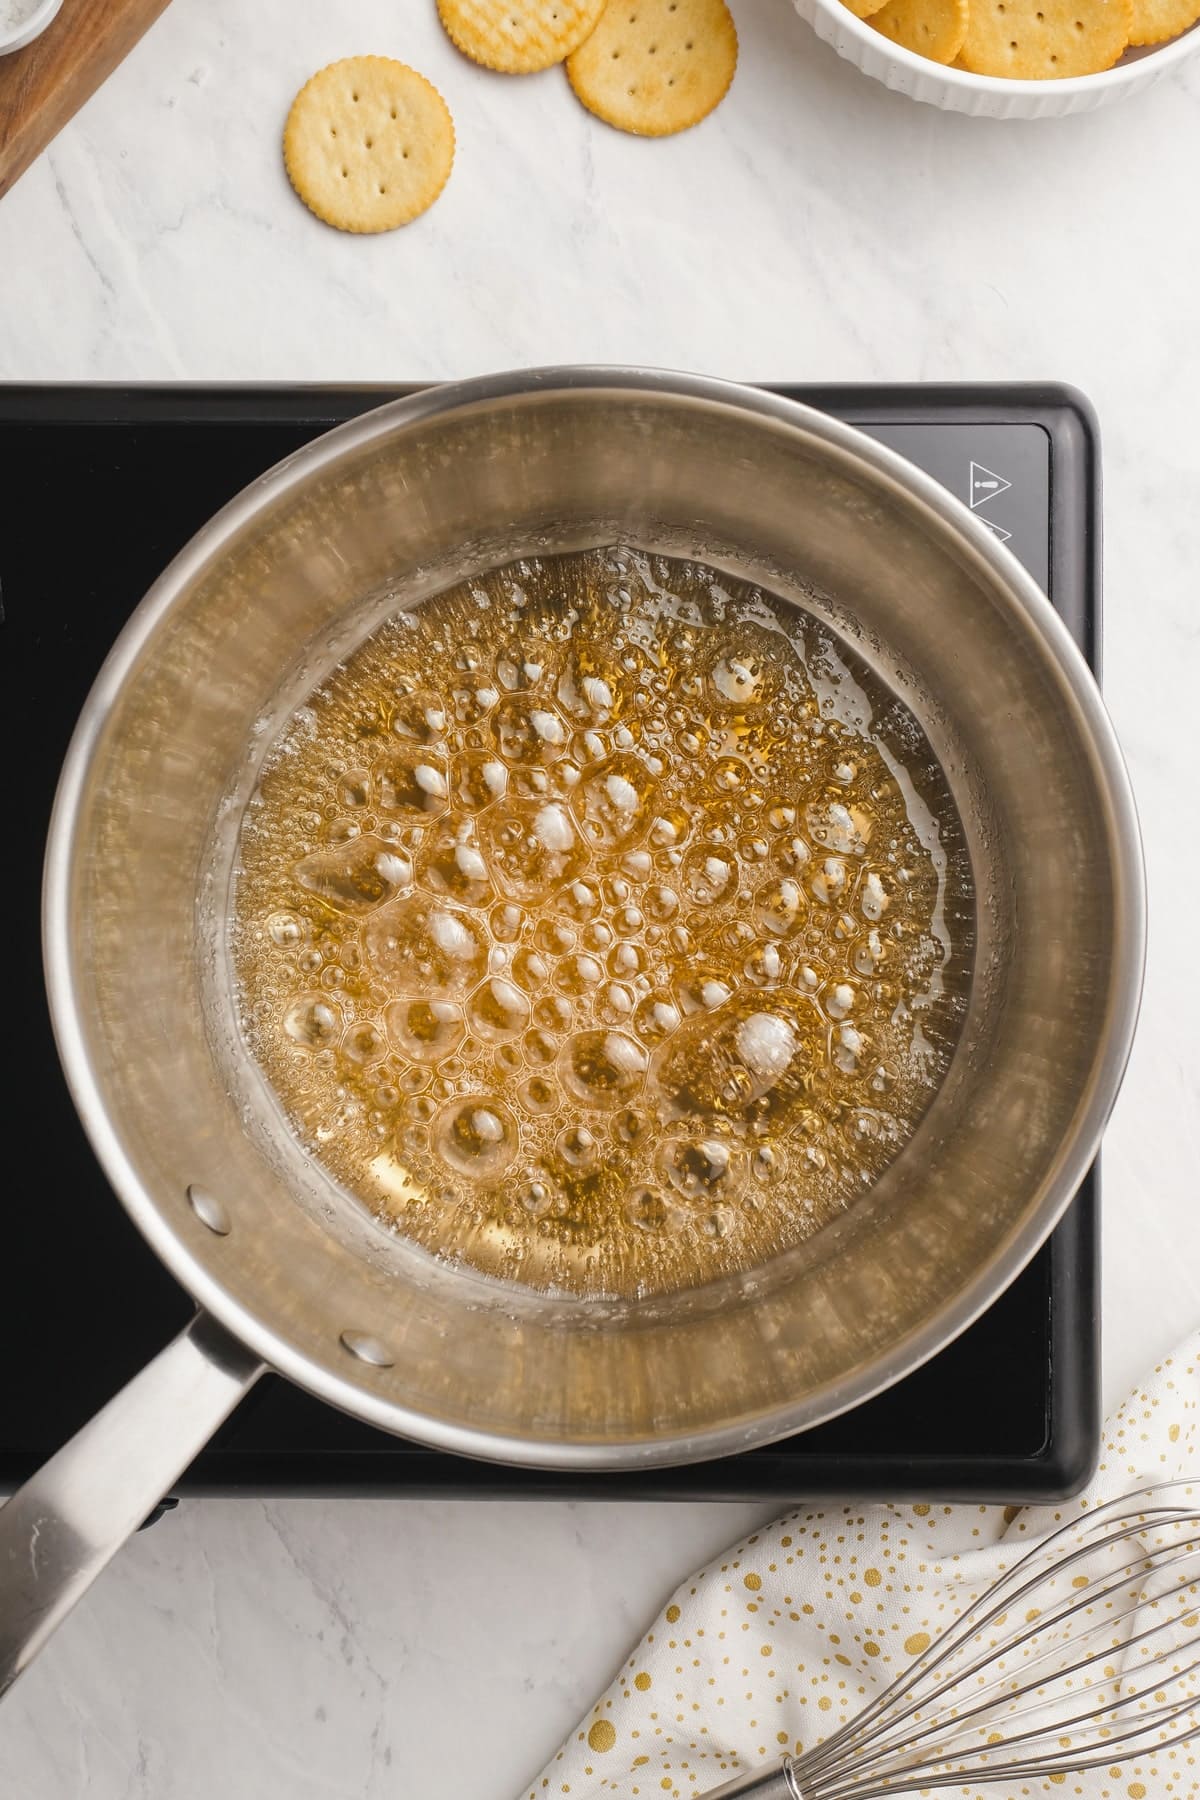 sugar, butter and water turning an amber color in saucepan